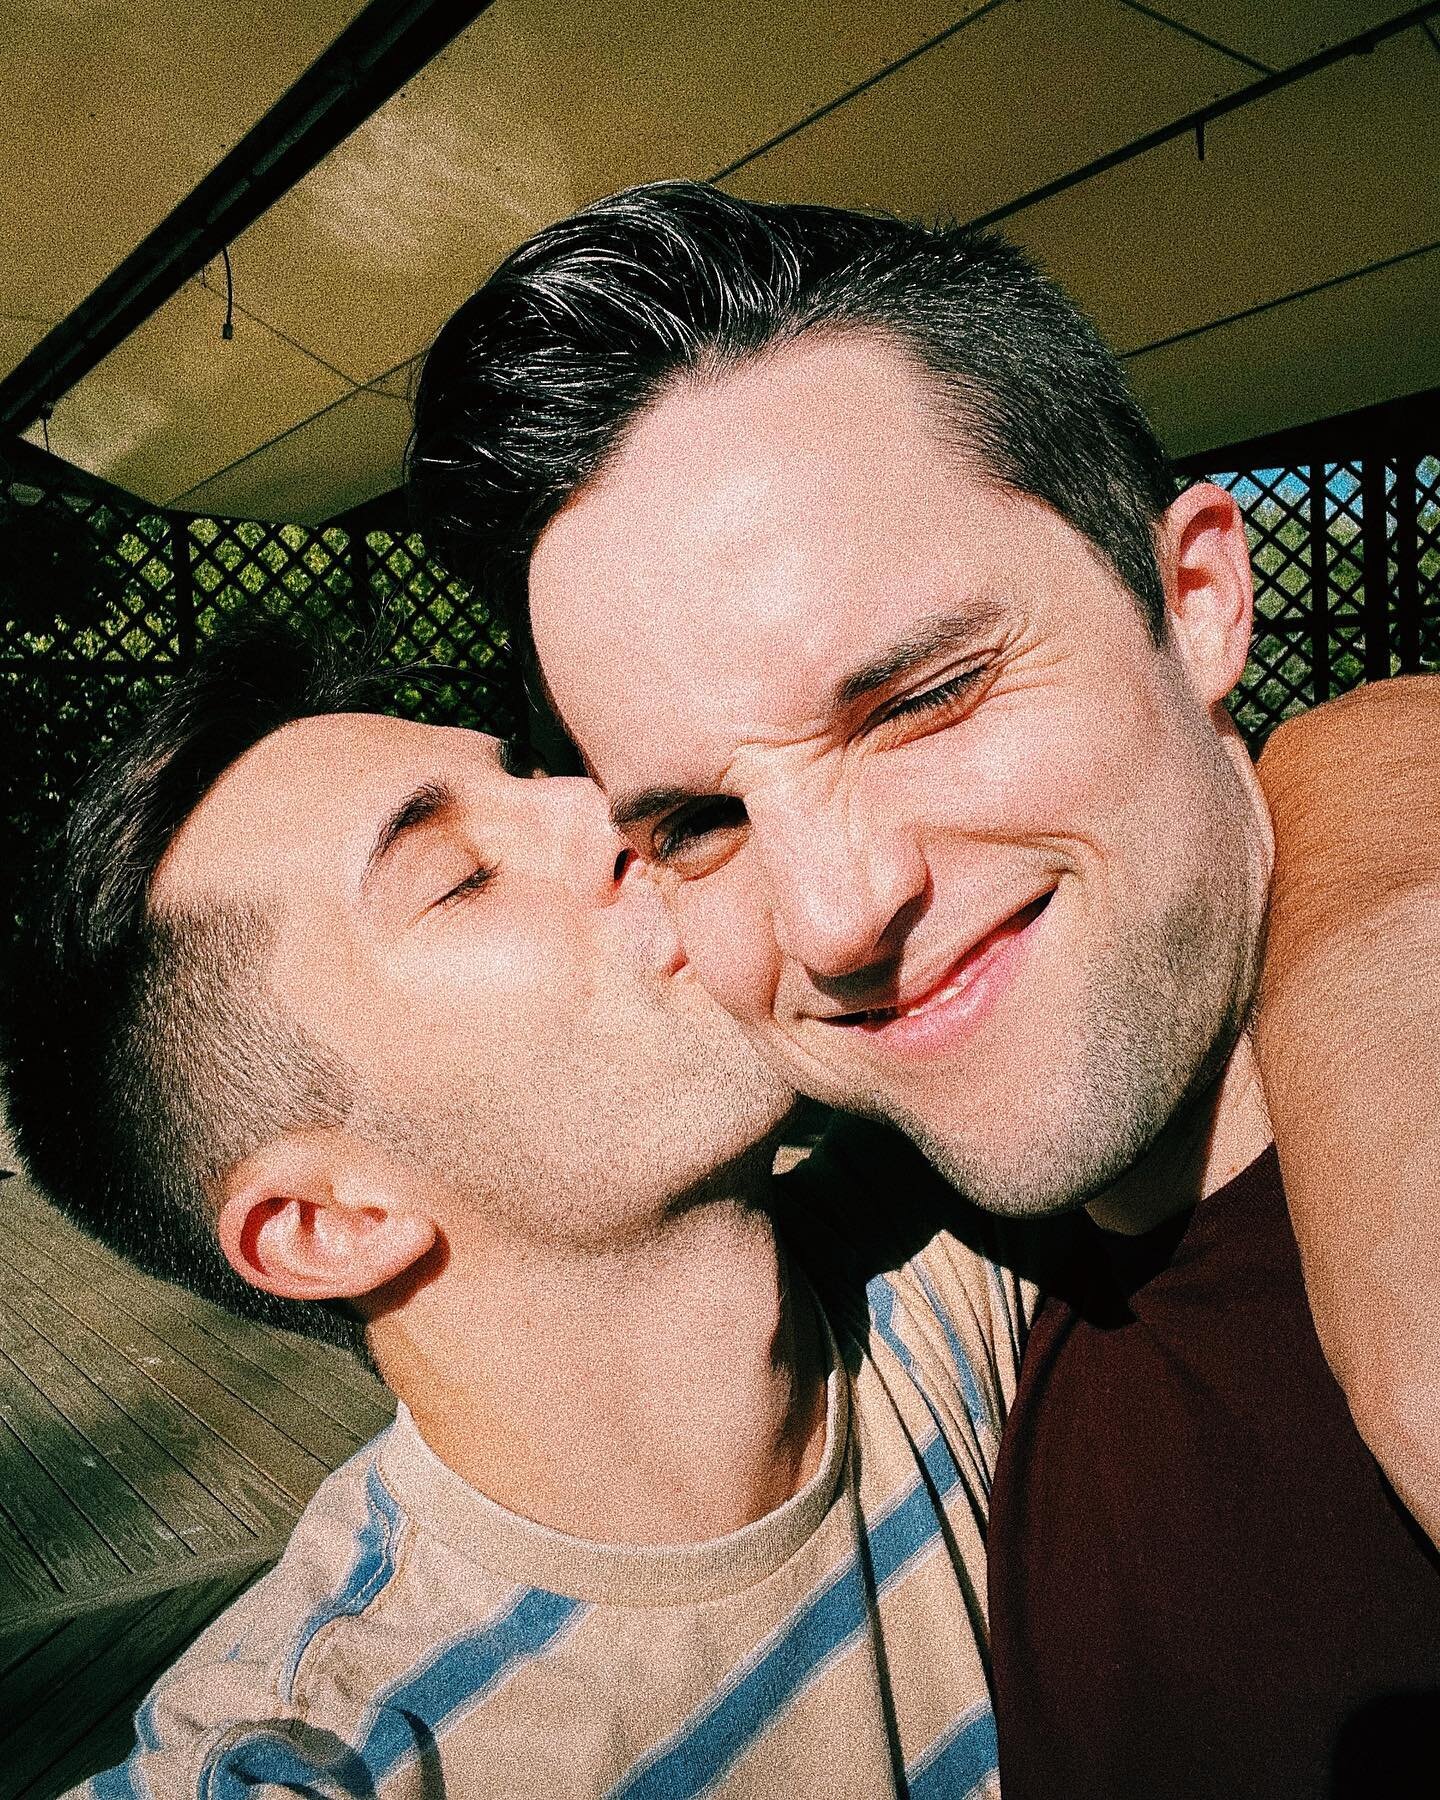 It&rsquo;s this boy&rsquo;s birthday!! @loganfarleyofficial I love you so much and I can&rsquo;t wait to celebrate with you when we&rsquo;re back together!

#loveislove #gaycouple #boyfriend #couplegoals #lgbt #boyfriends #gay #instagay